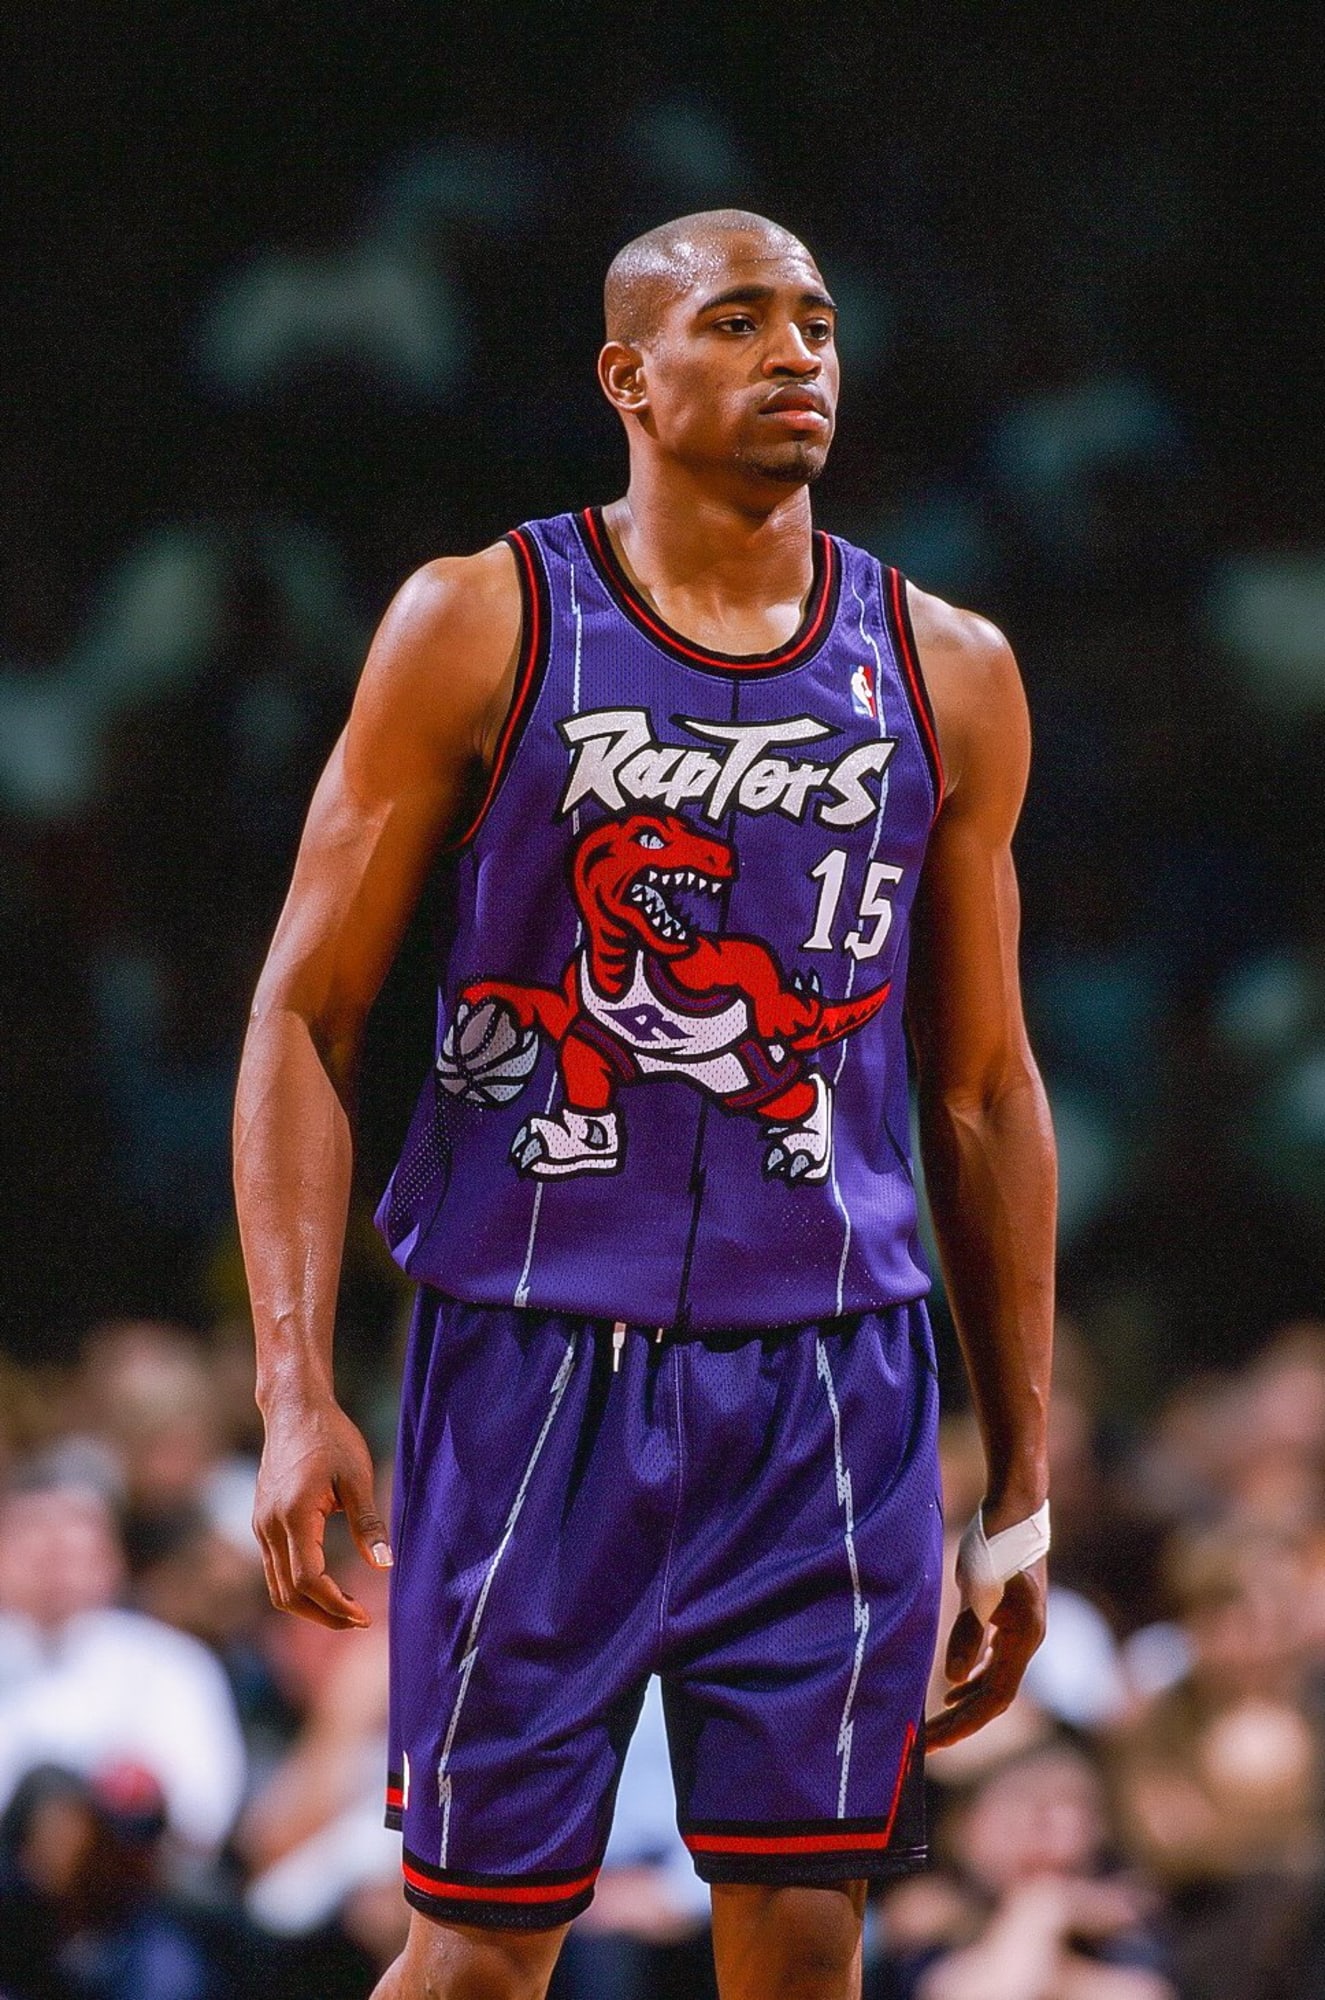 Vince Carter hoping to have jersey retired by Toronto Raptors